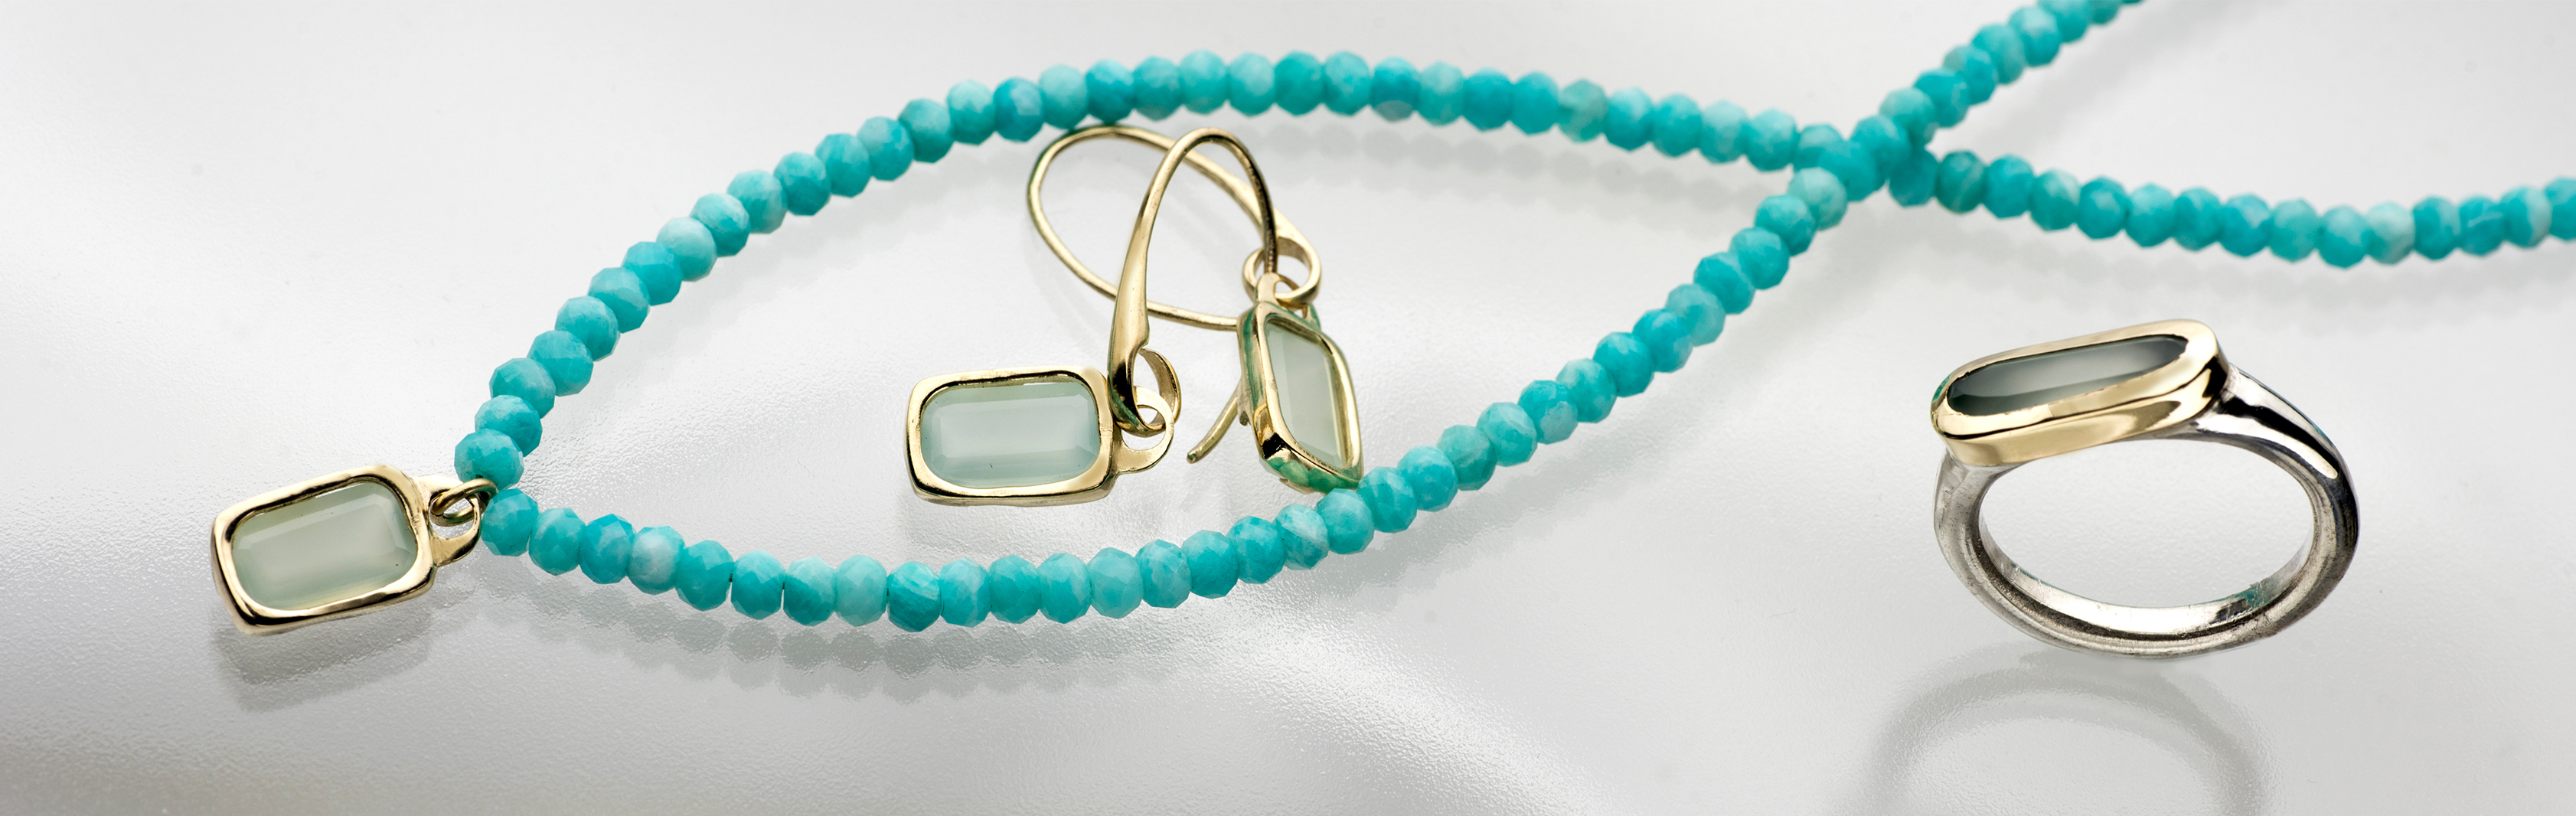 Aquamarine Collection | 925 Sterling Silver & 9K Gold Jewelry with Milky Aquamarine